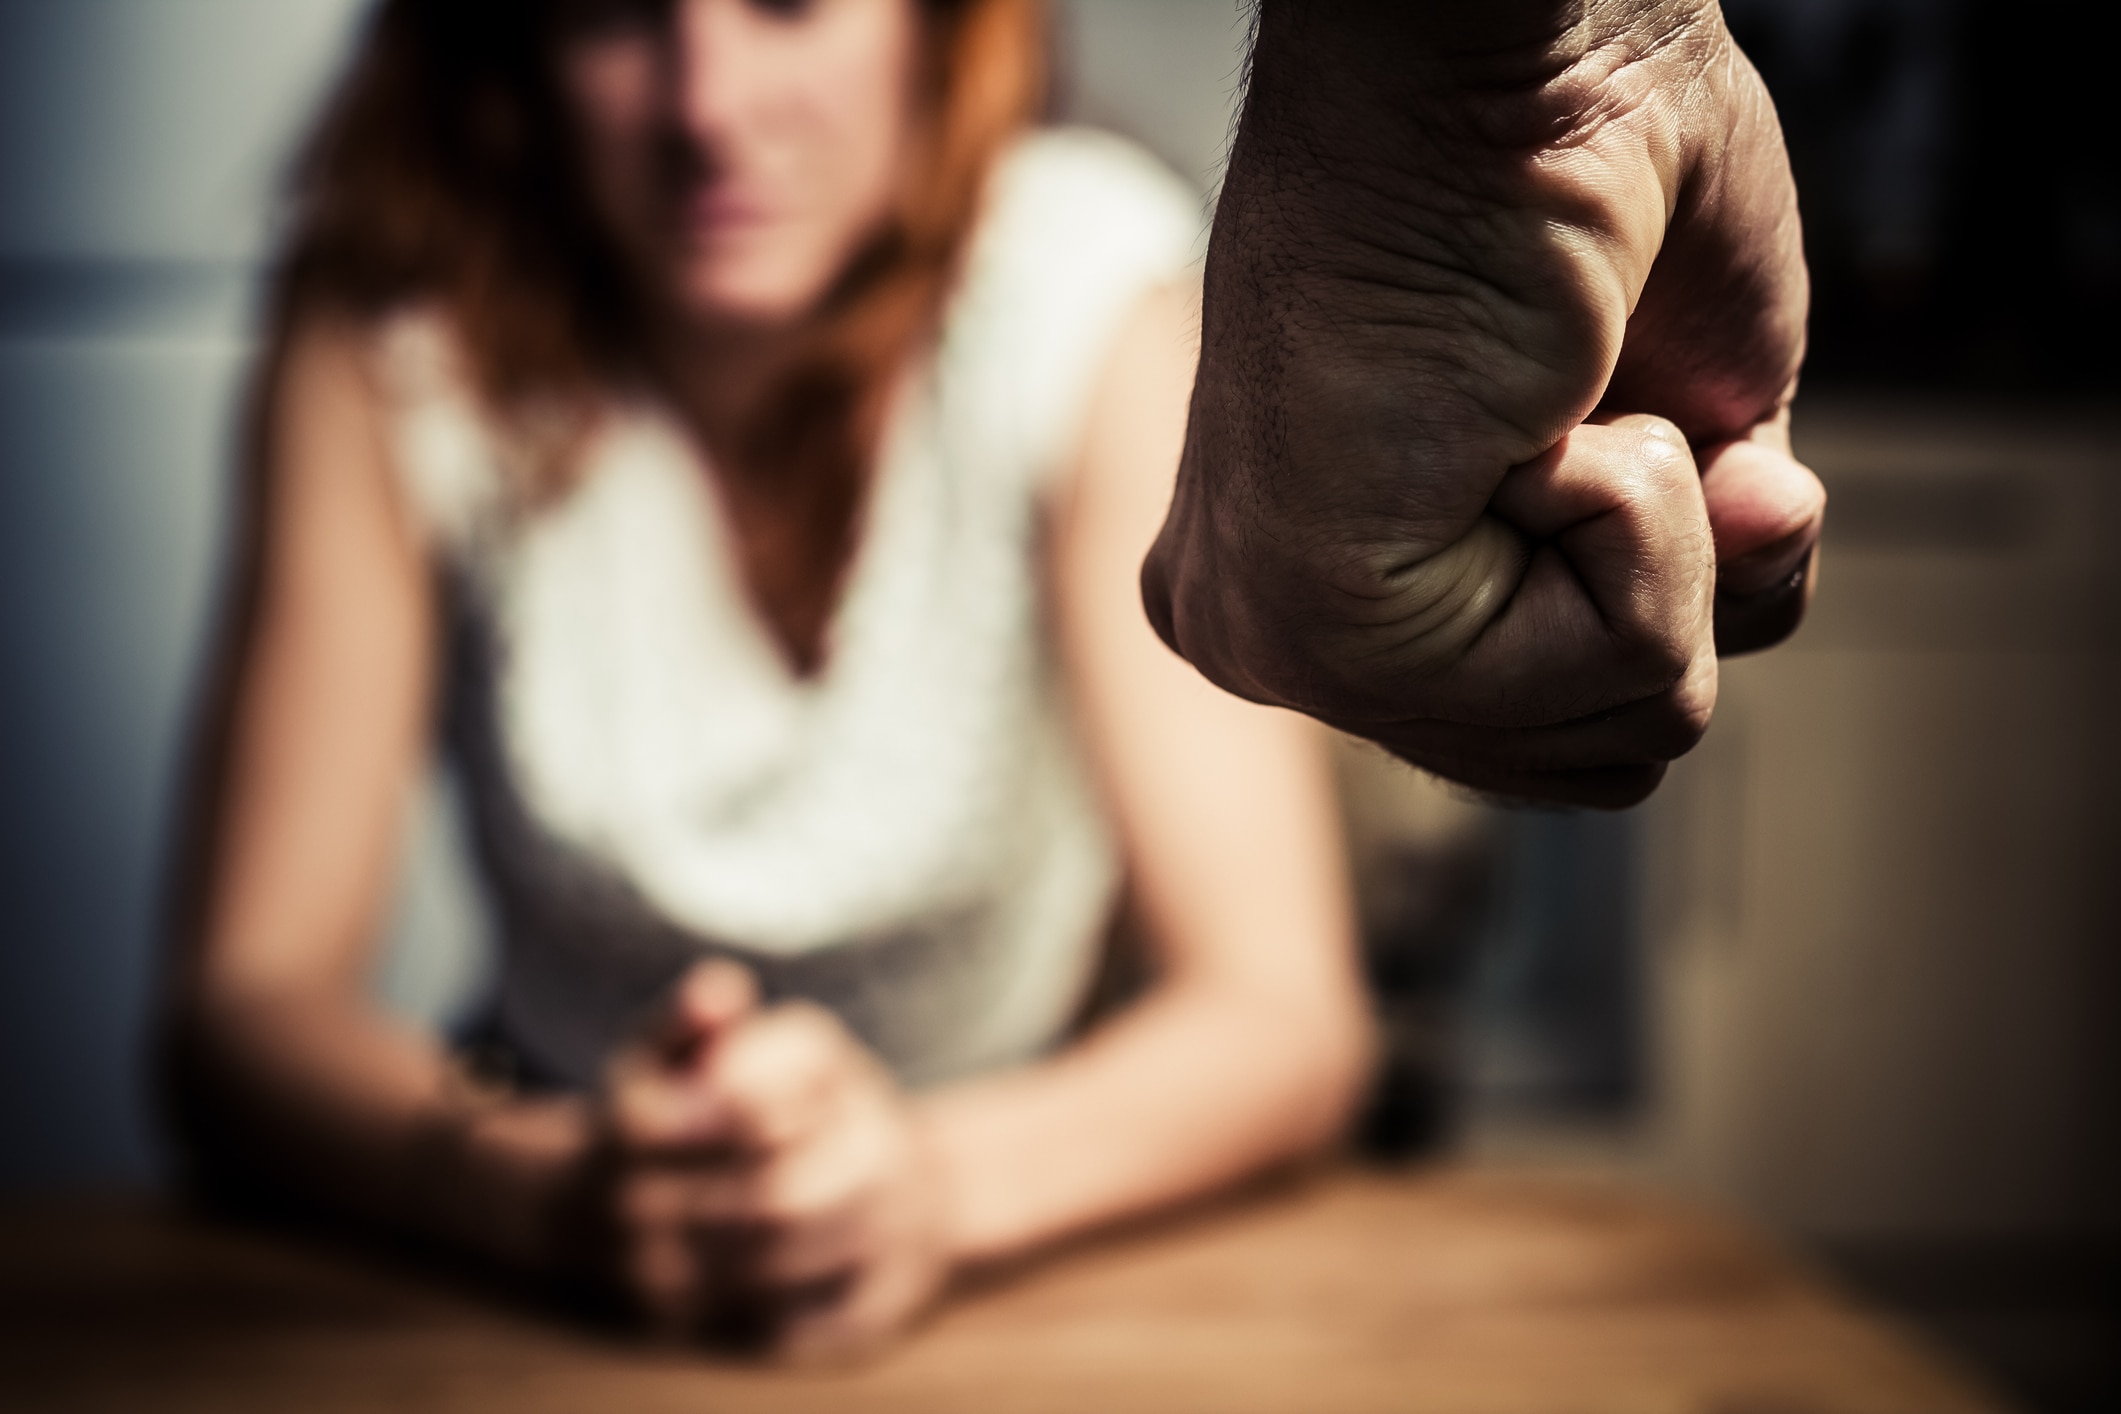 THE EFFECT OF DOMESTIC VIOLENCE ON DIVISION OF PROPERTY